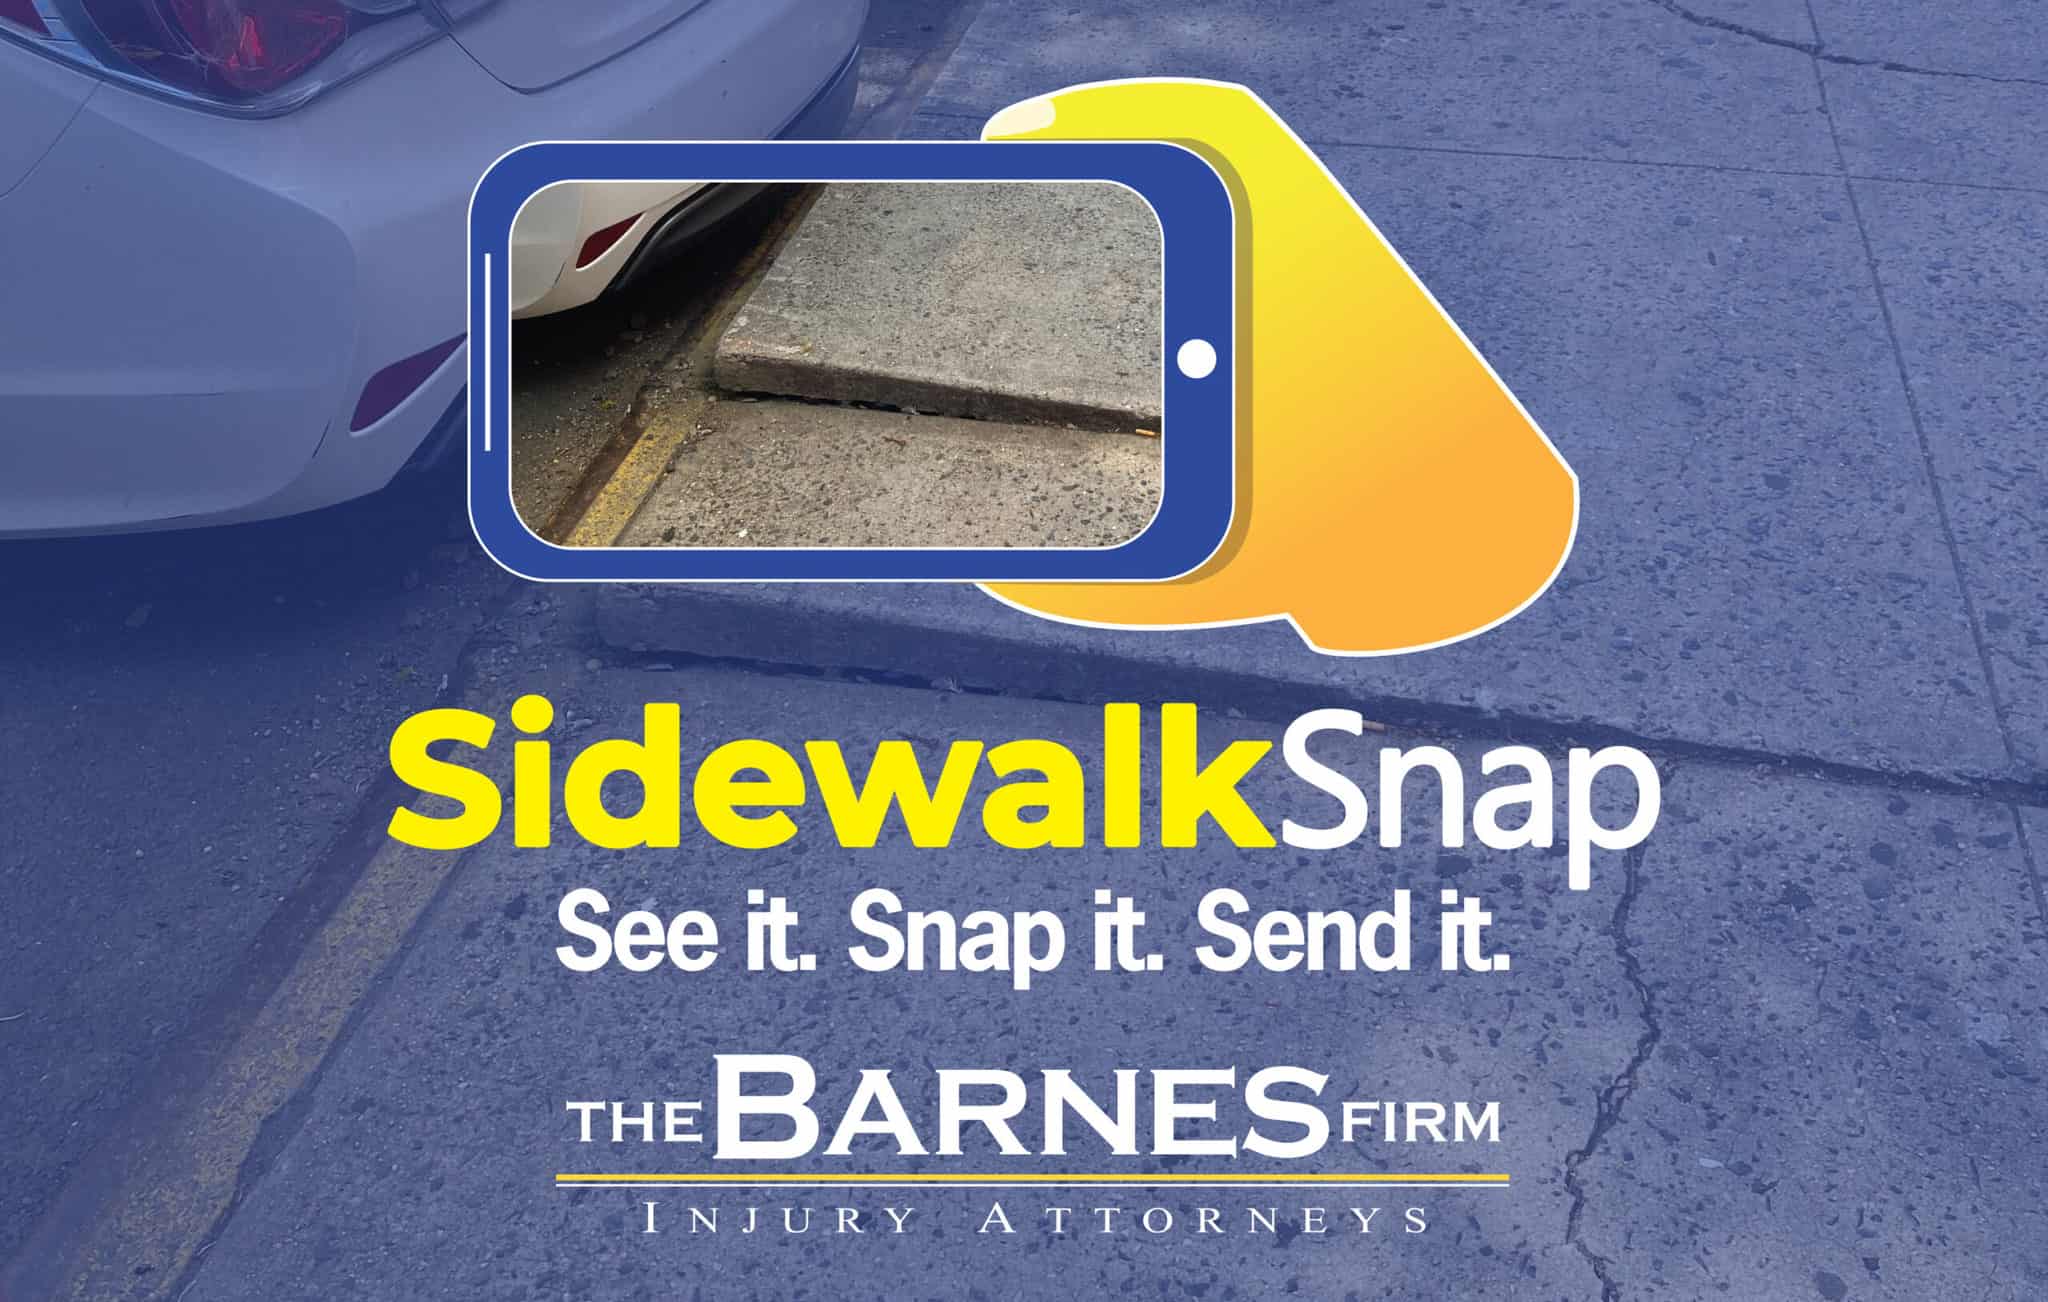 sidewalk snap logo, see it snap it send it, by the barnes firm on a blue background